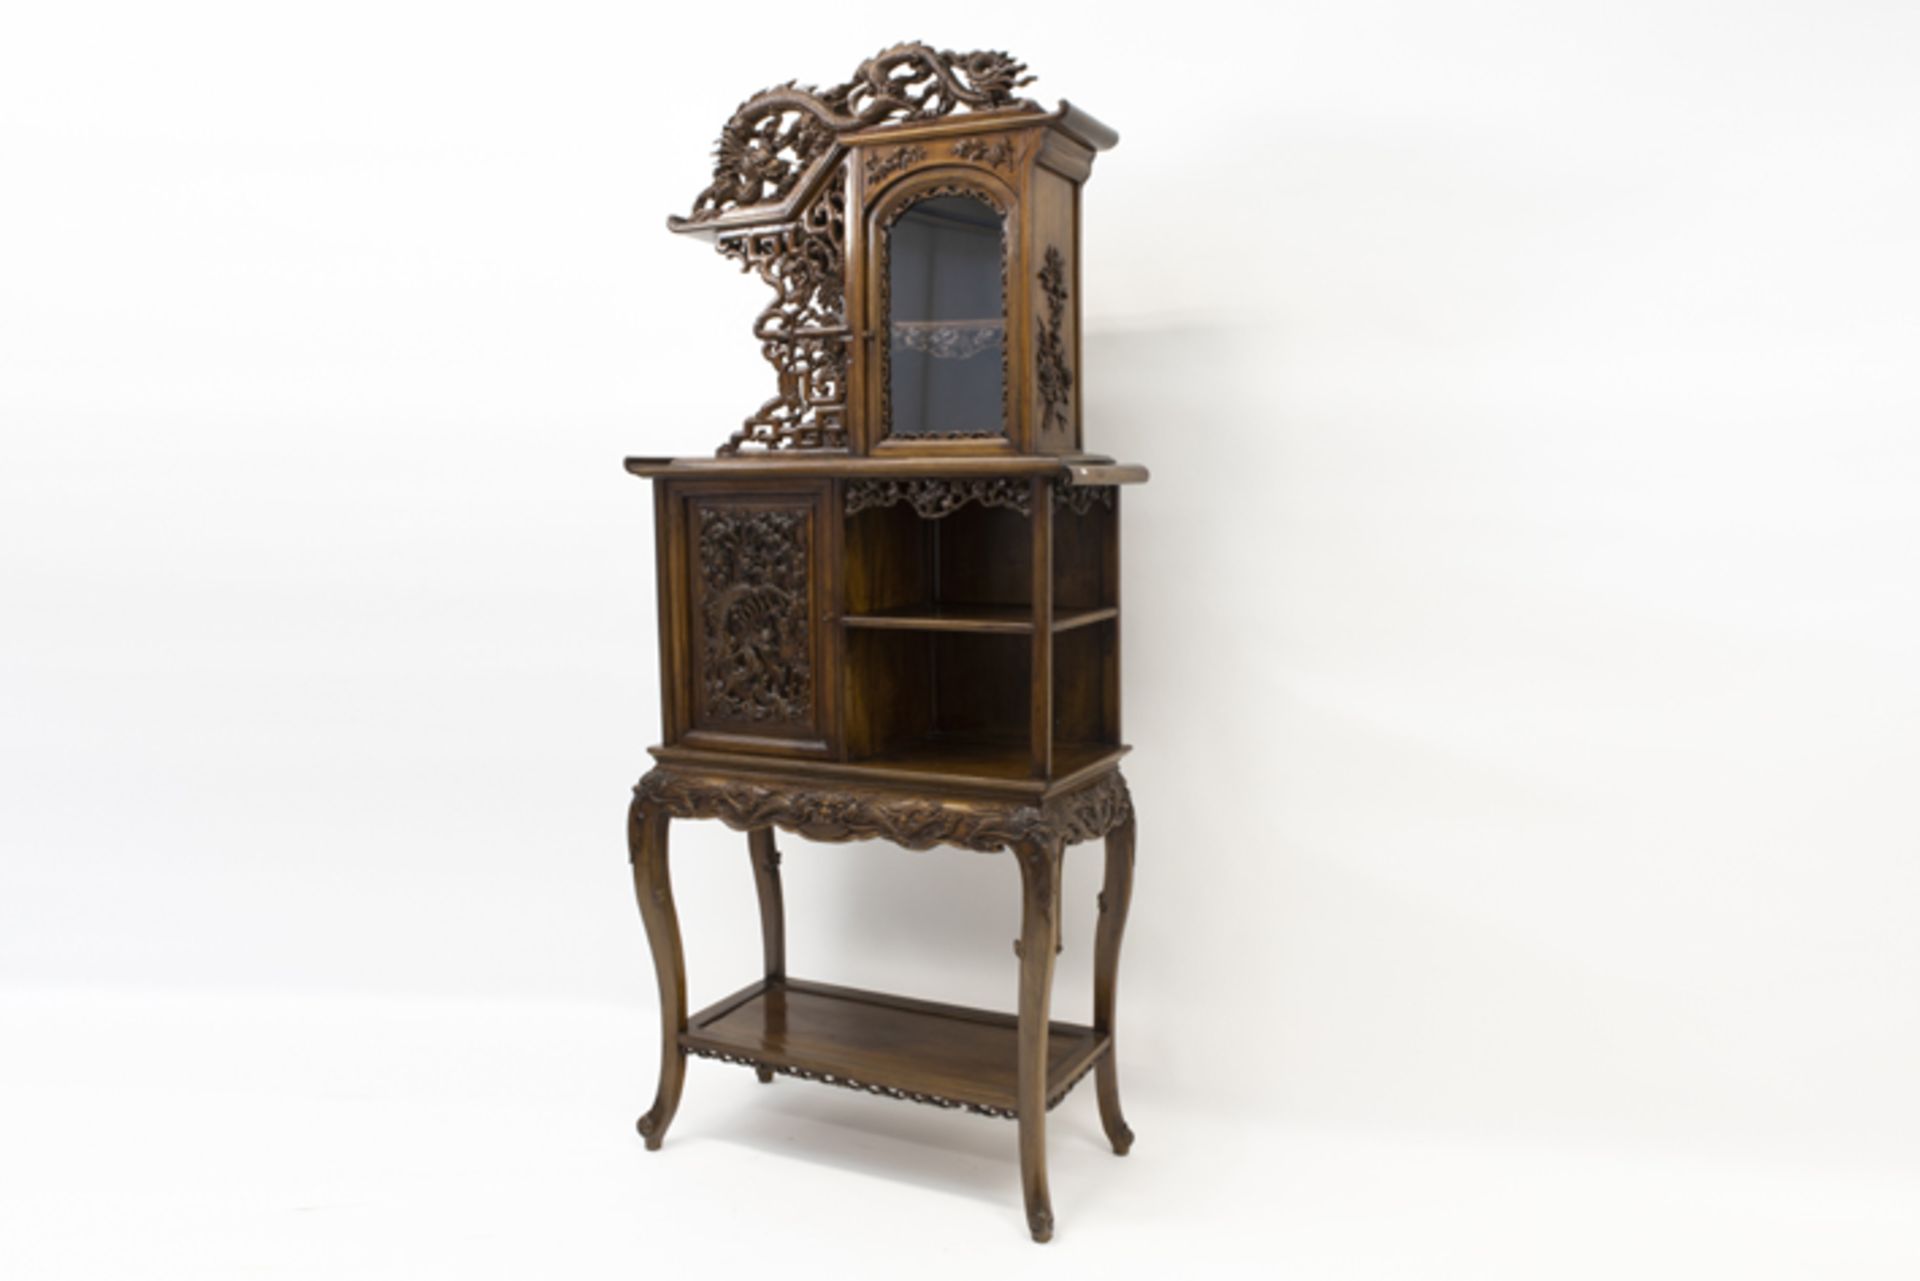 antique Chinese cabinet in an richly ornamentated exotic wood species with finely sculpted motifs - Image 2 of 4